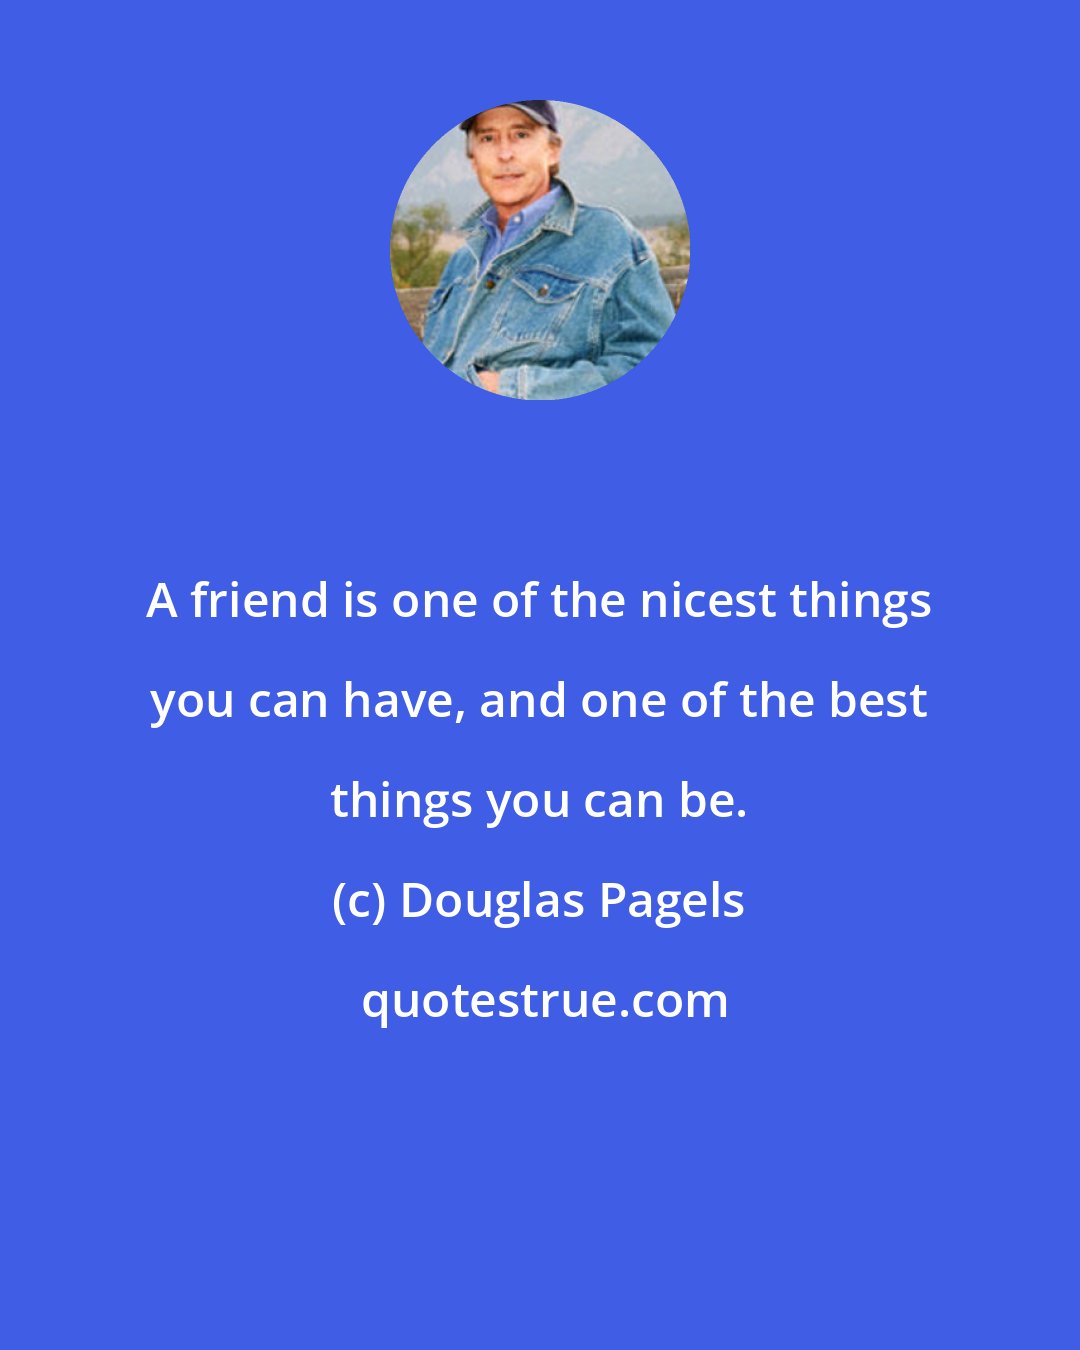 Douglas Pagels: A friend is one of the nicest things you can have, and one of the best things you can be.